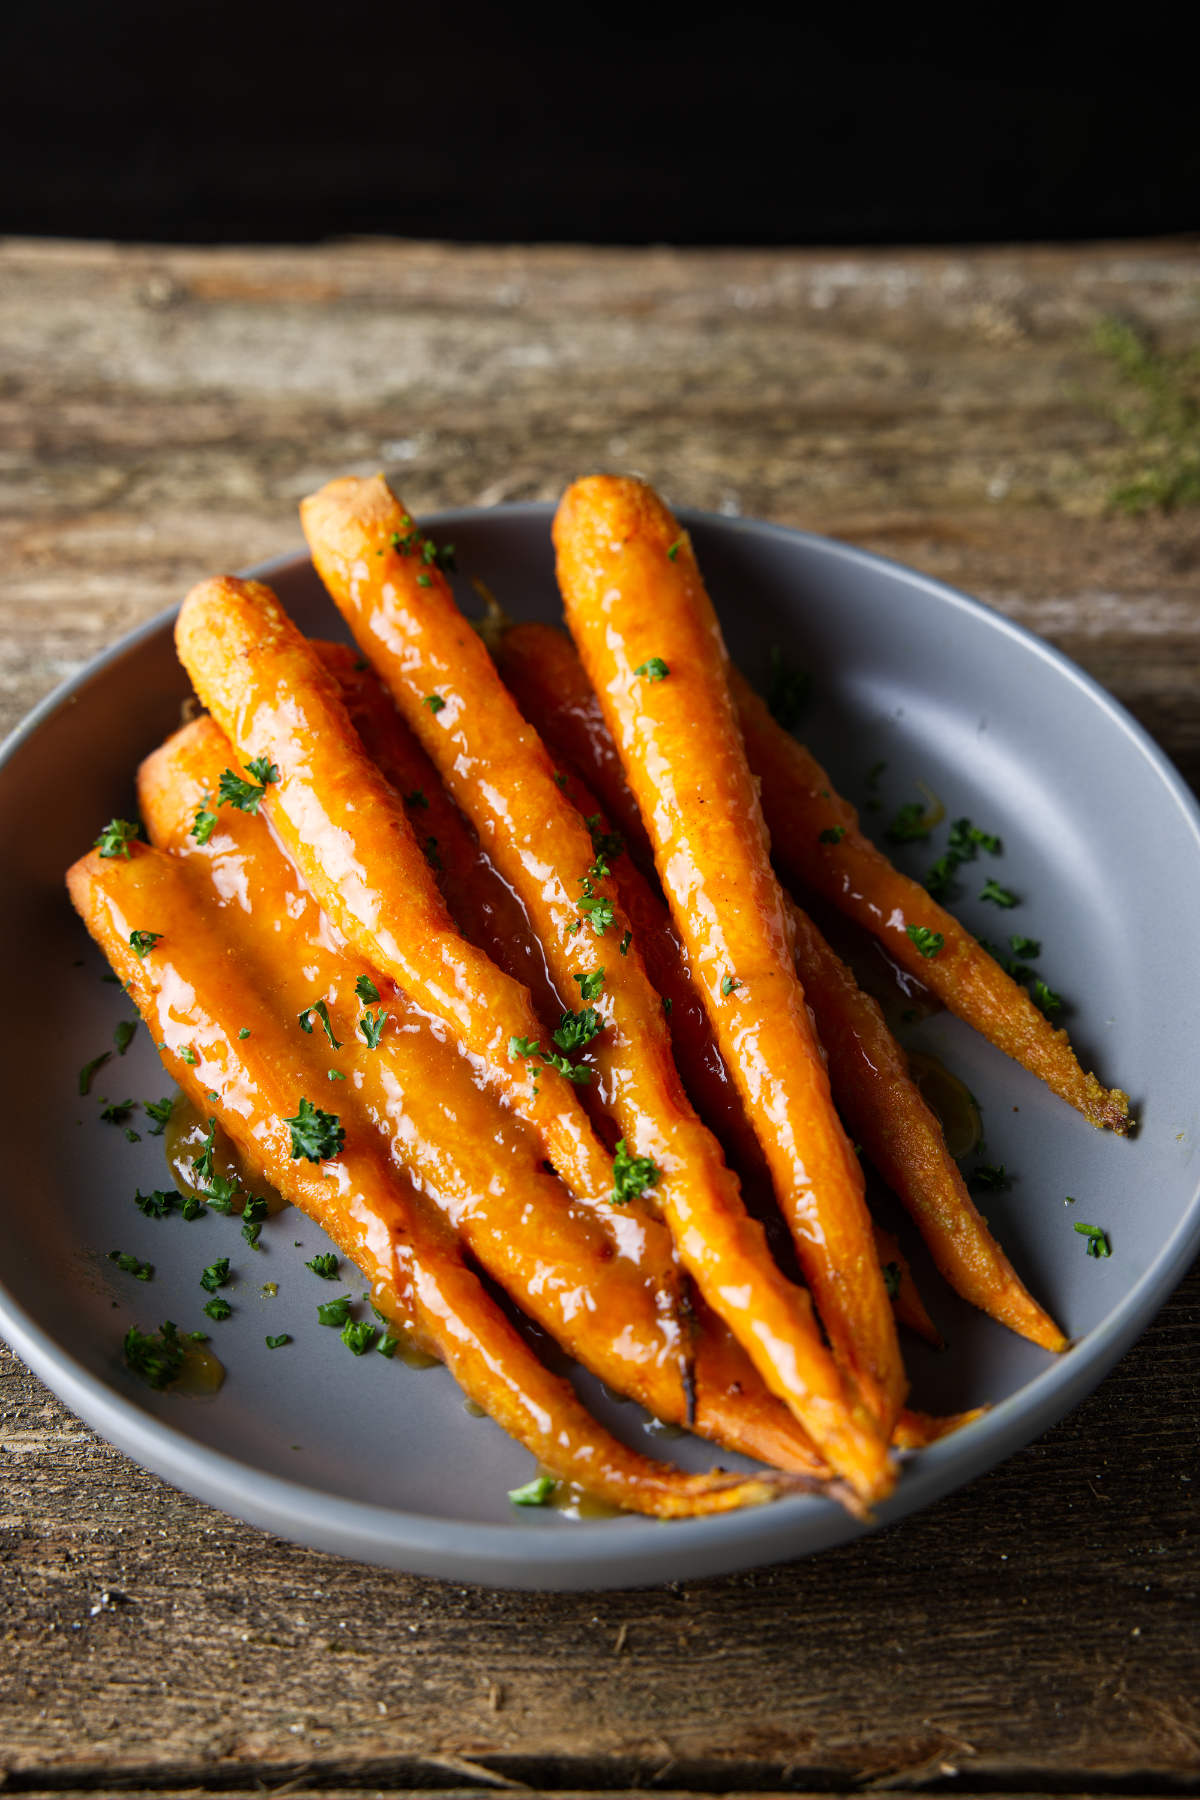 Glazed carrots in a bowl.